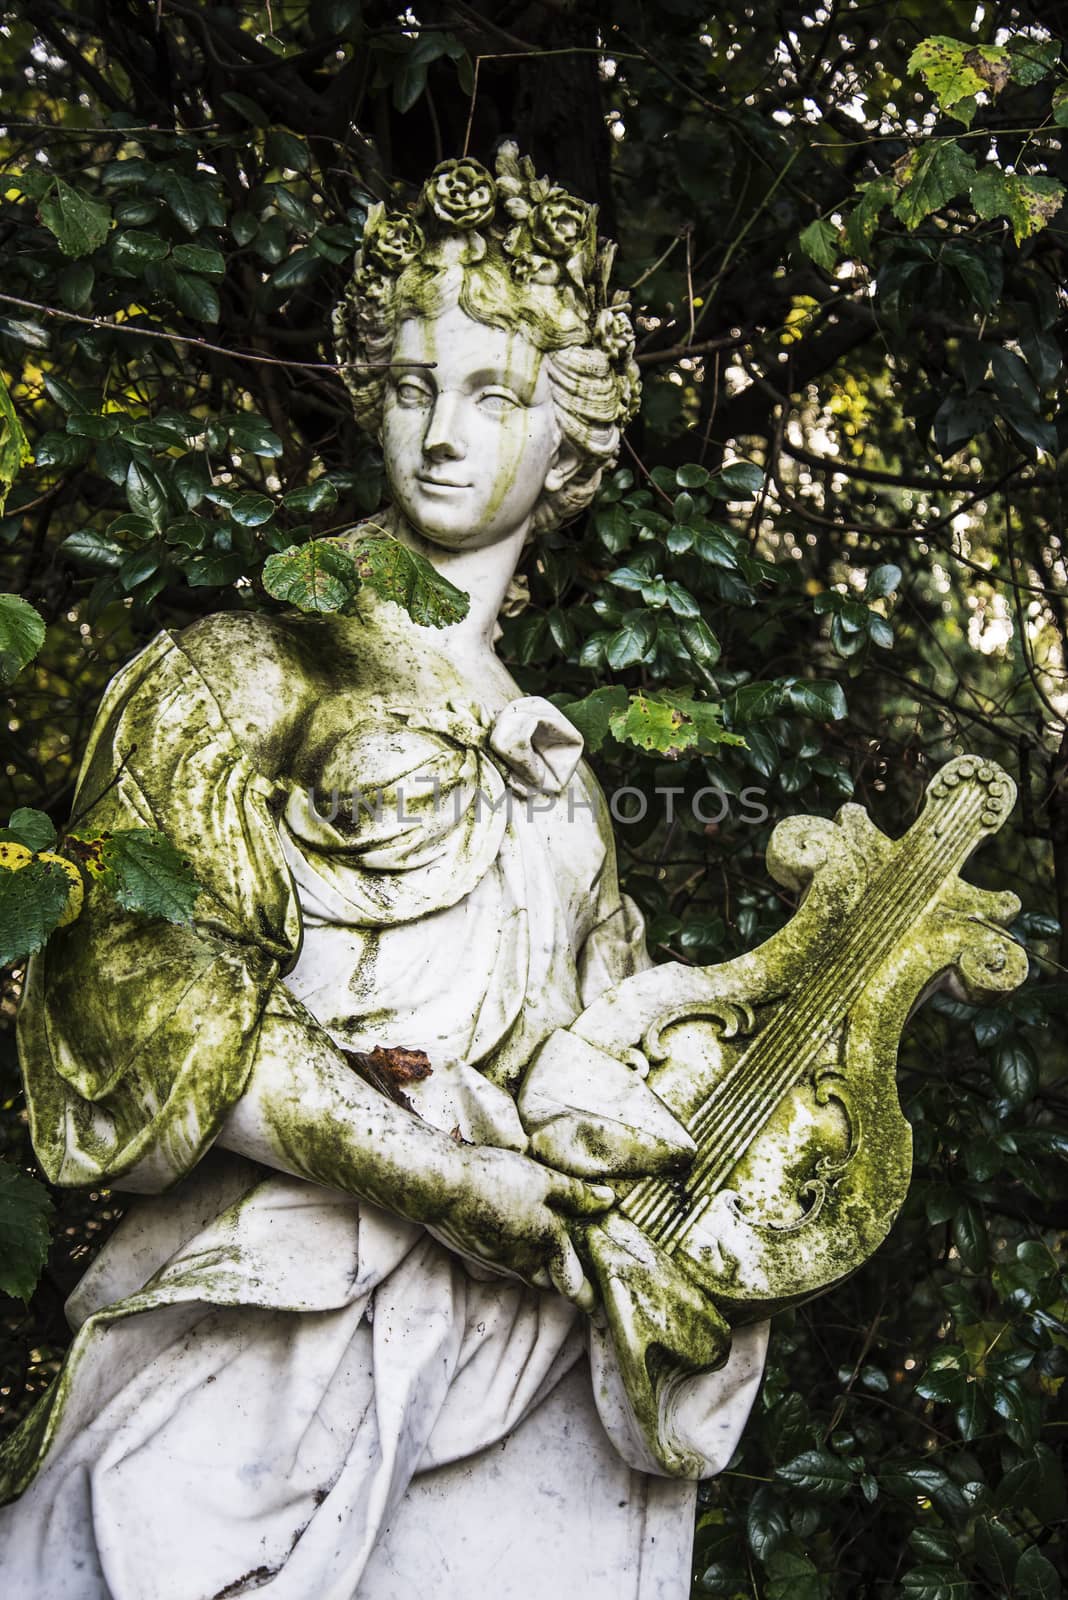 Old statue inside the Royal Palace garden in Caserta, Italy 